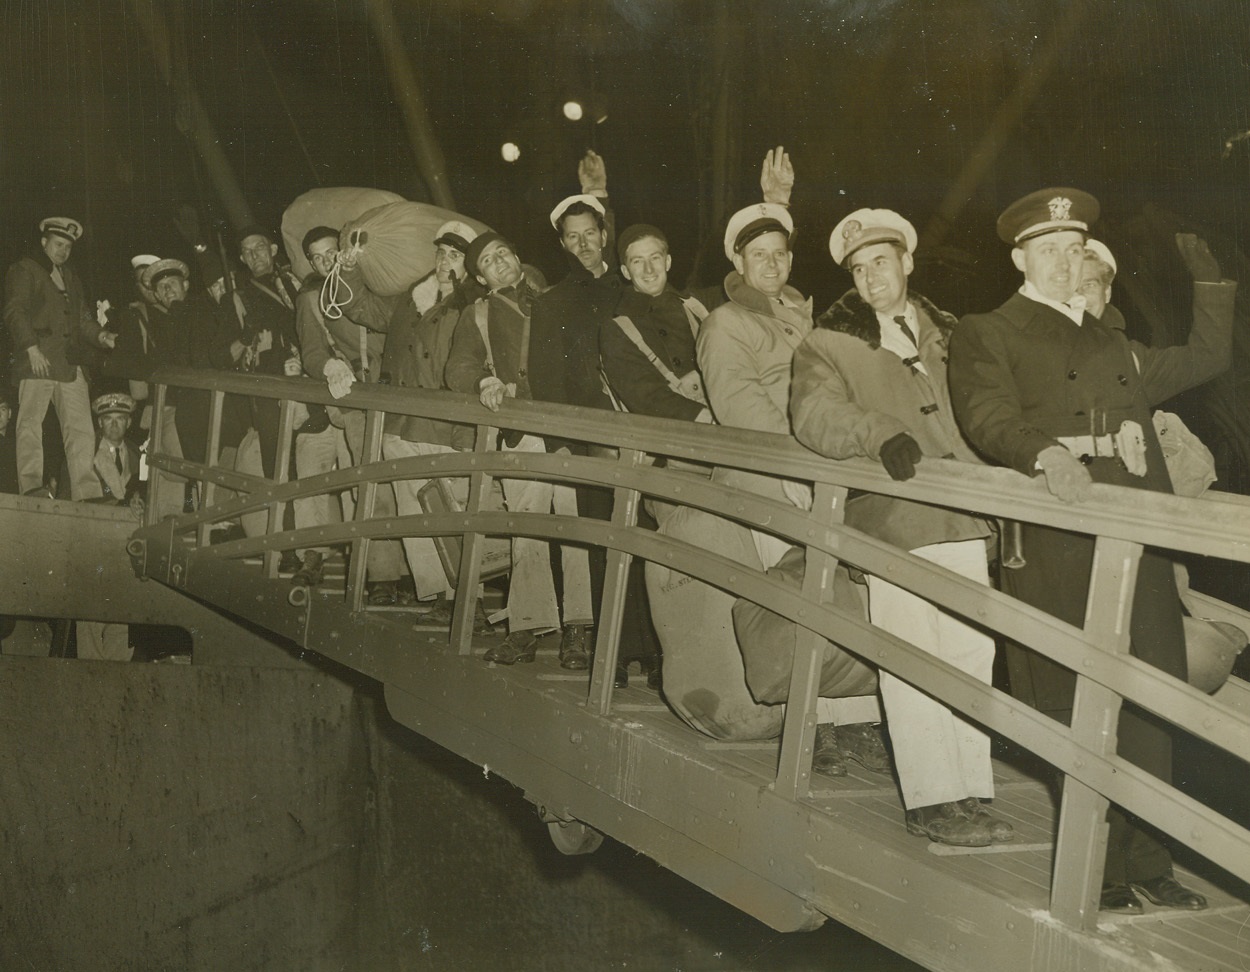 Back On American Soil, 12/17/1943. New York City – Commander Wallace L. Rinehart of St. Louis, MO., Commander of the 54th U.S. Navy Construction Battalion leads a gang of jubilant Seabees down the Gangplank of a Navy transport to set foot on American soil for the first time in ten months. With an excellent record of service in the Mediterranean behind them, the Seabees returned to the States today (Dec. 17th). The boys went directly to Camp Endicott, R.I., where every CB man will be granted Christmas leave.;